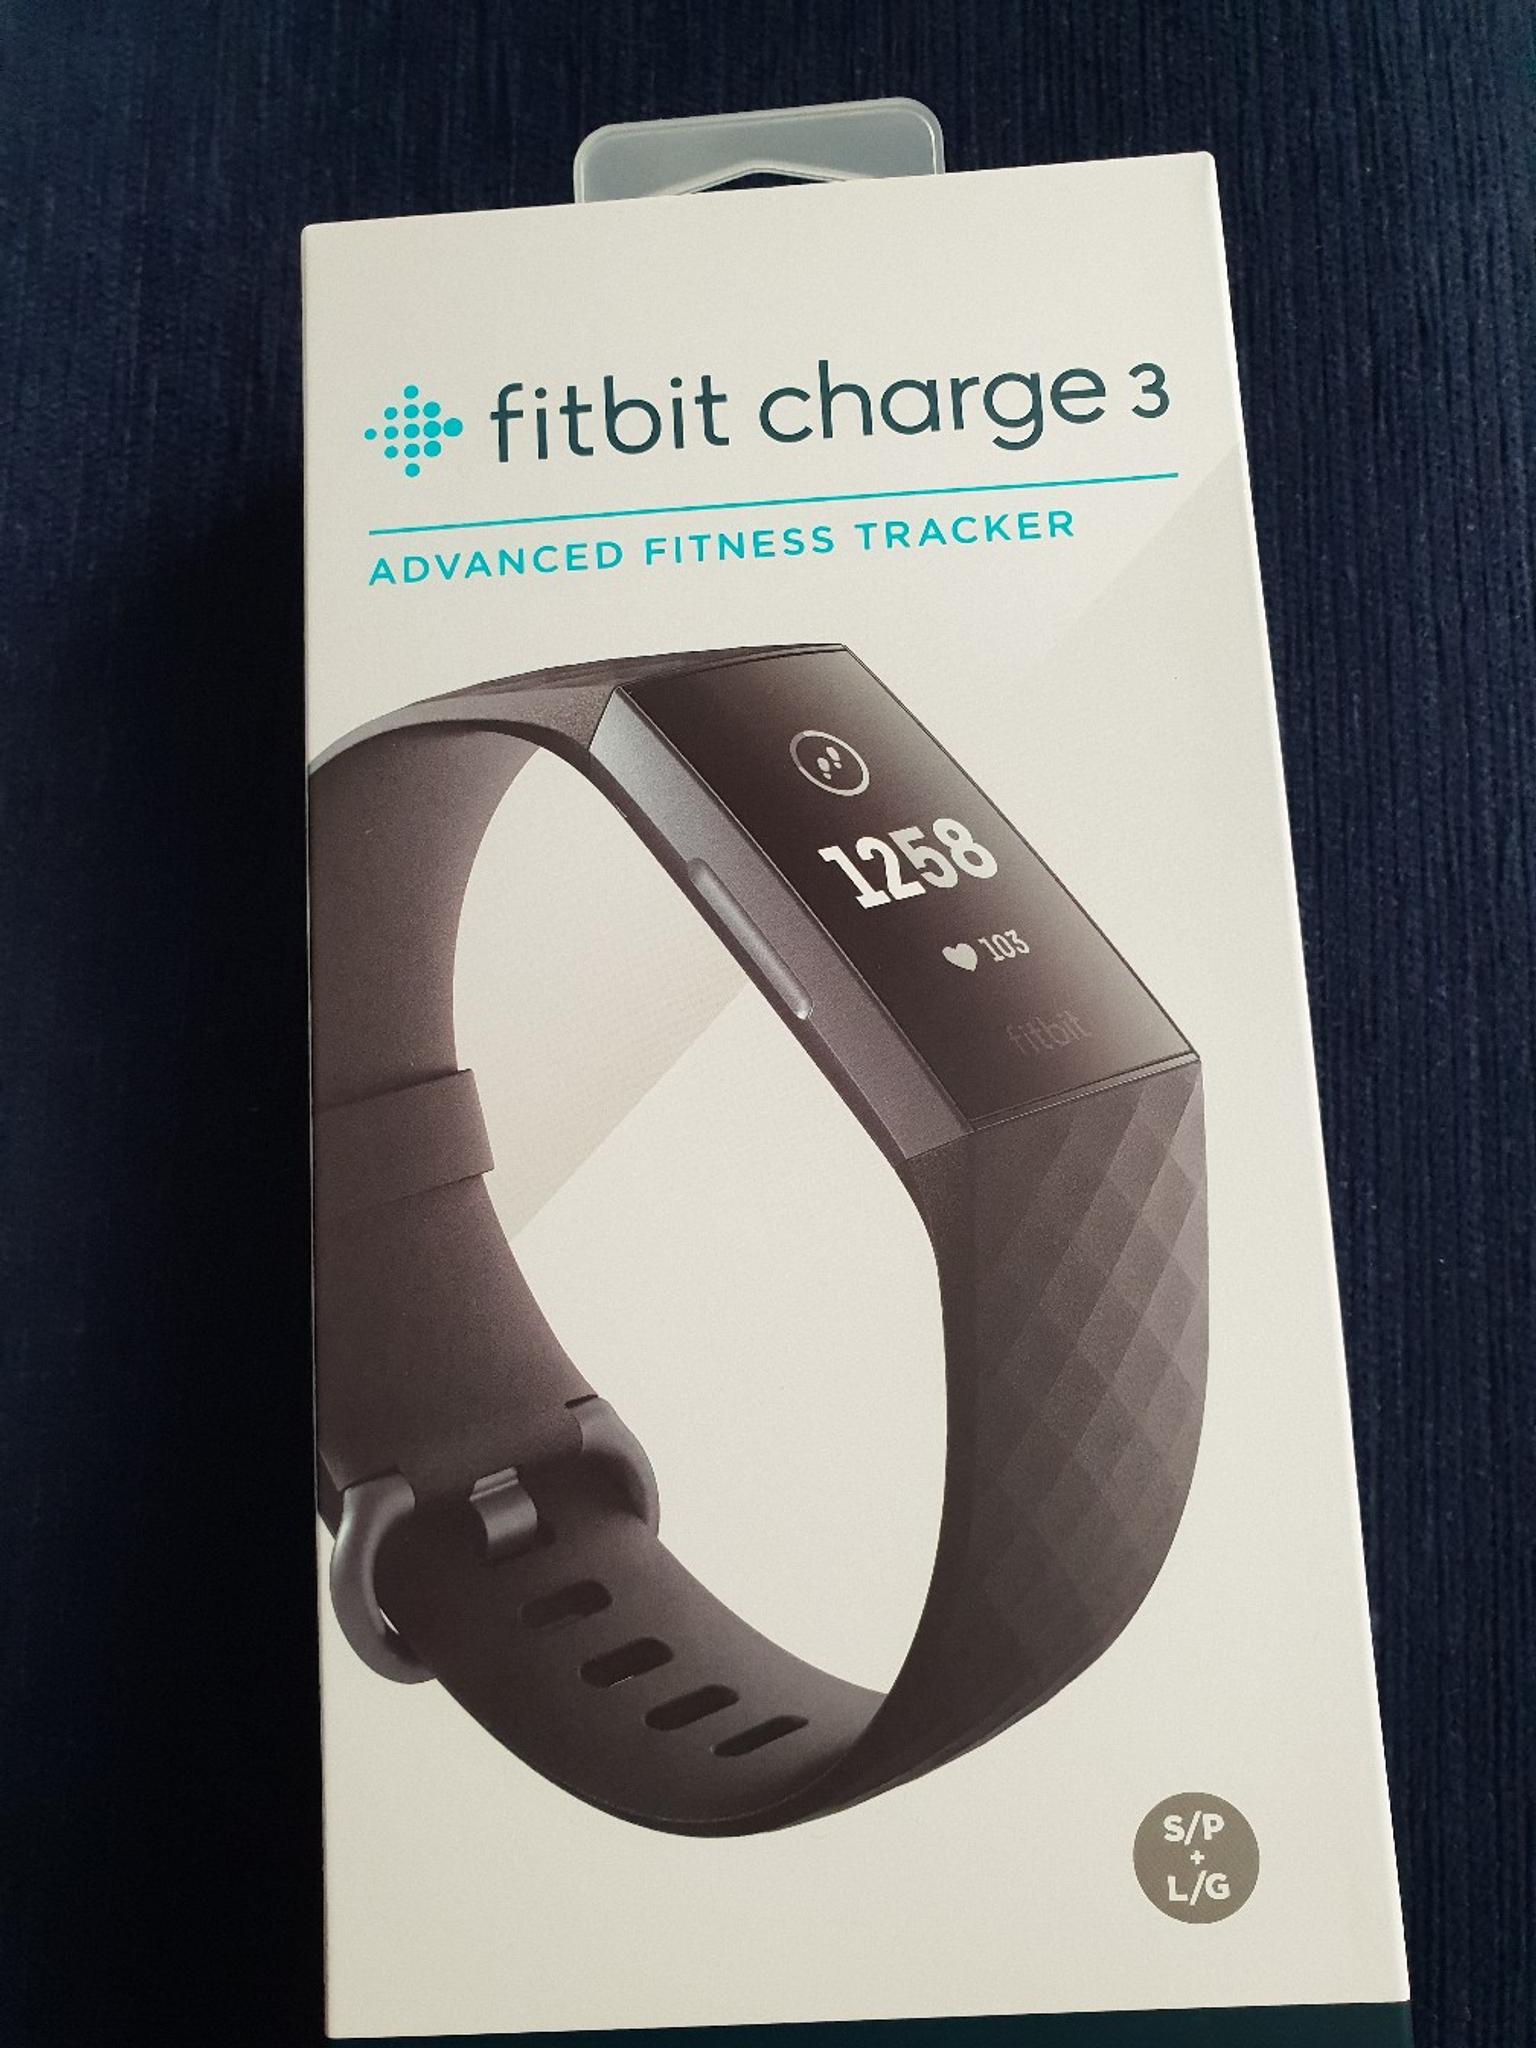 fitbit charge 3 in the box